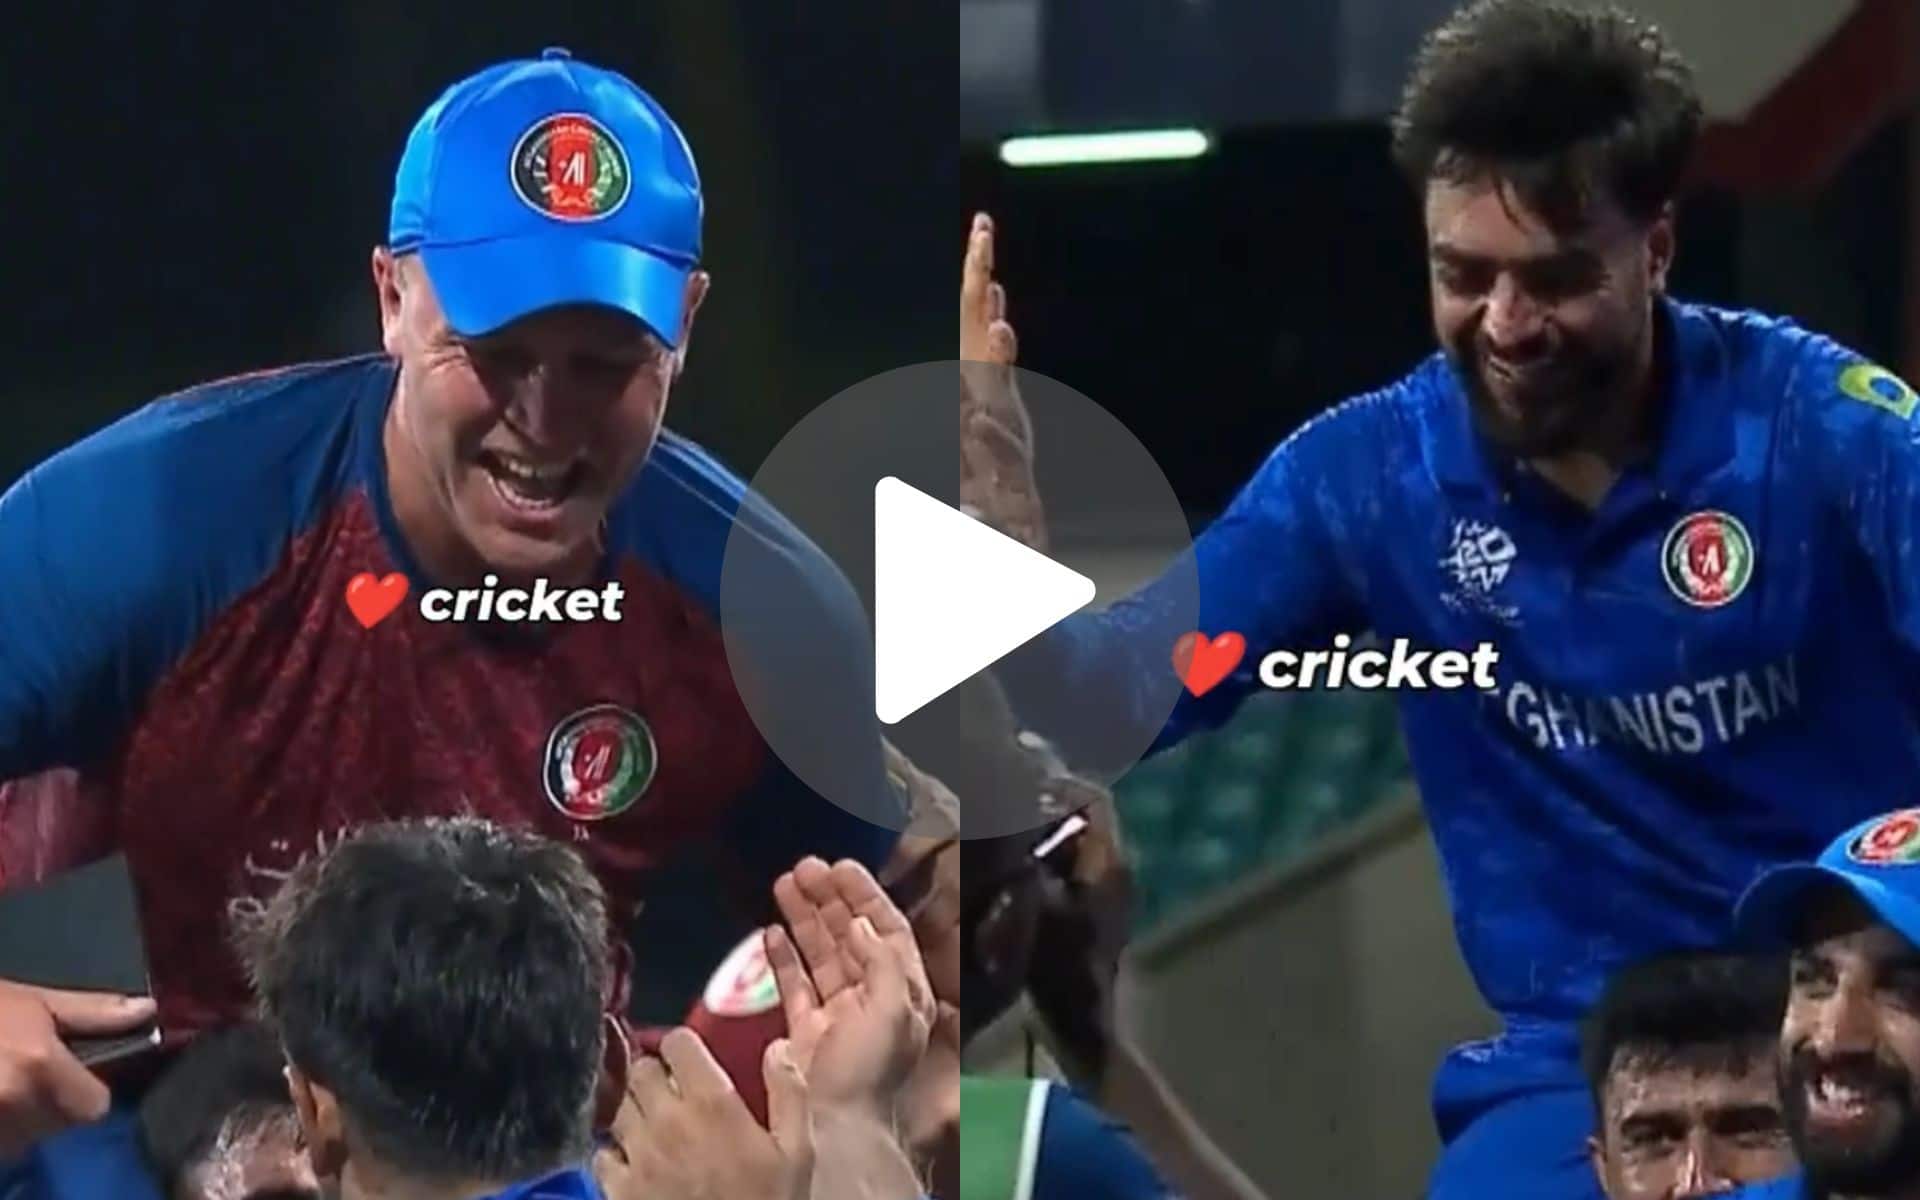 [Watch] AFG Players Give 'Lap Of Honour' To Rashid Khan, Trott By Hoisting On Shoulders